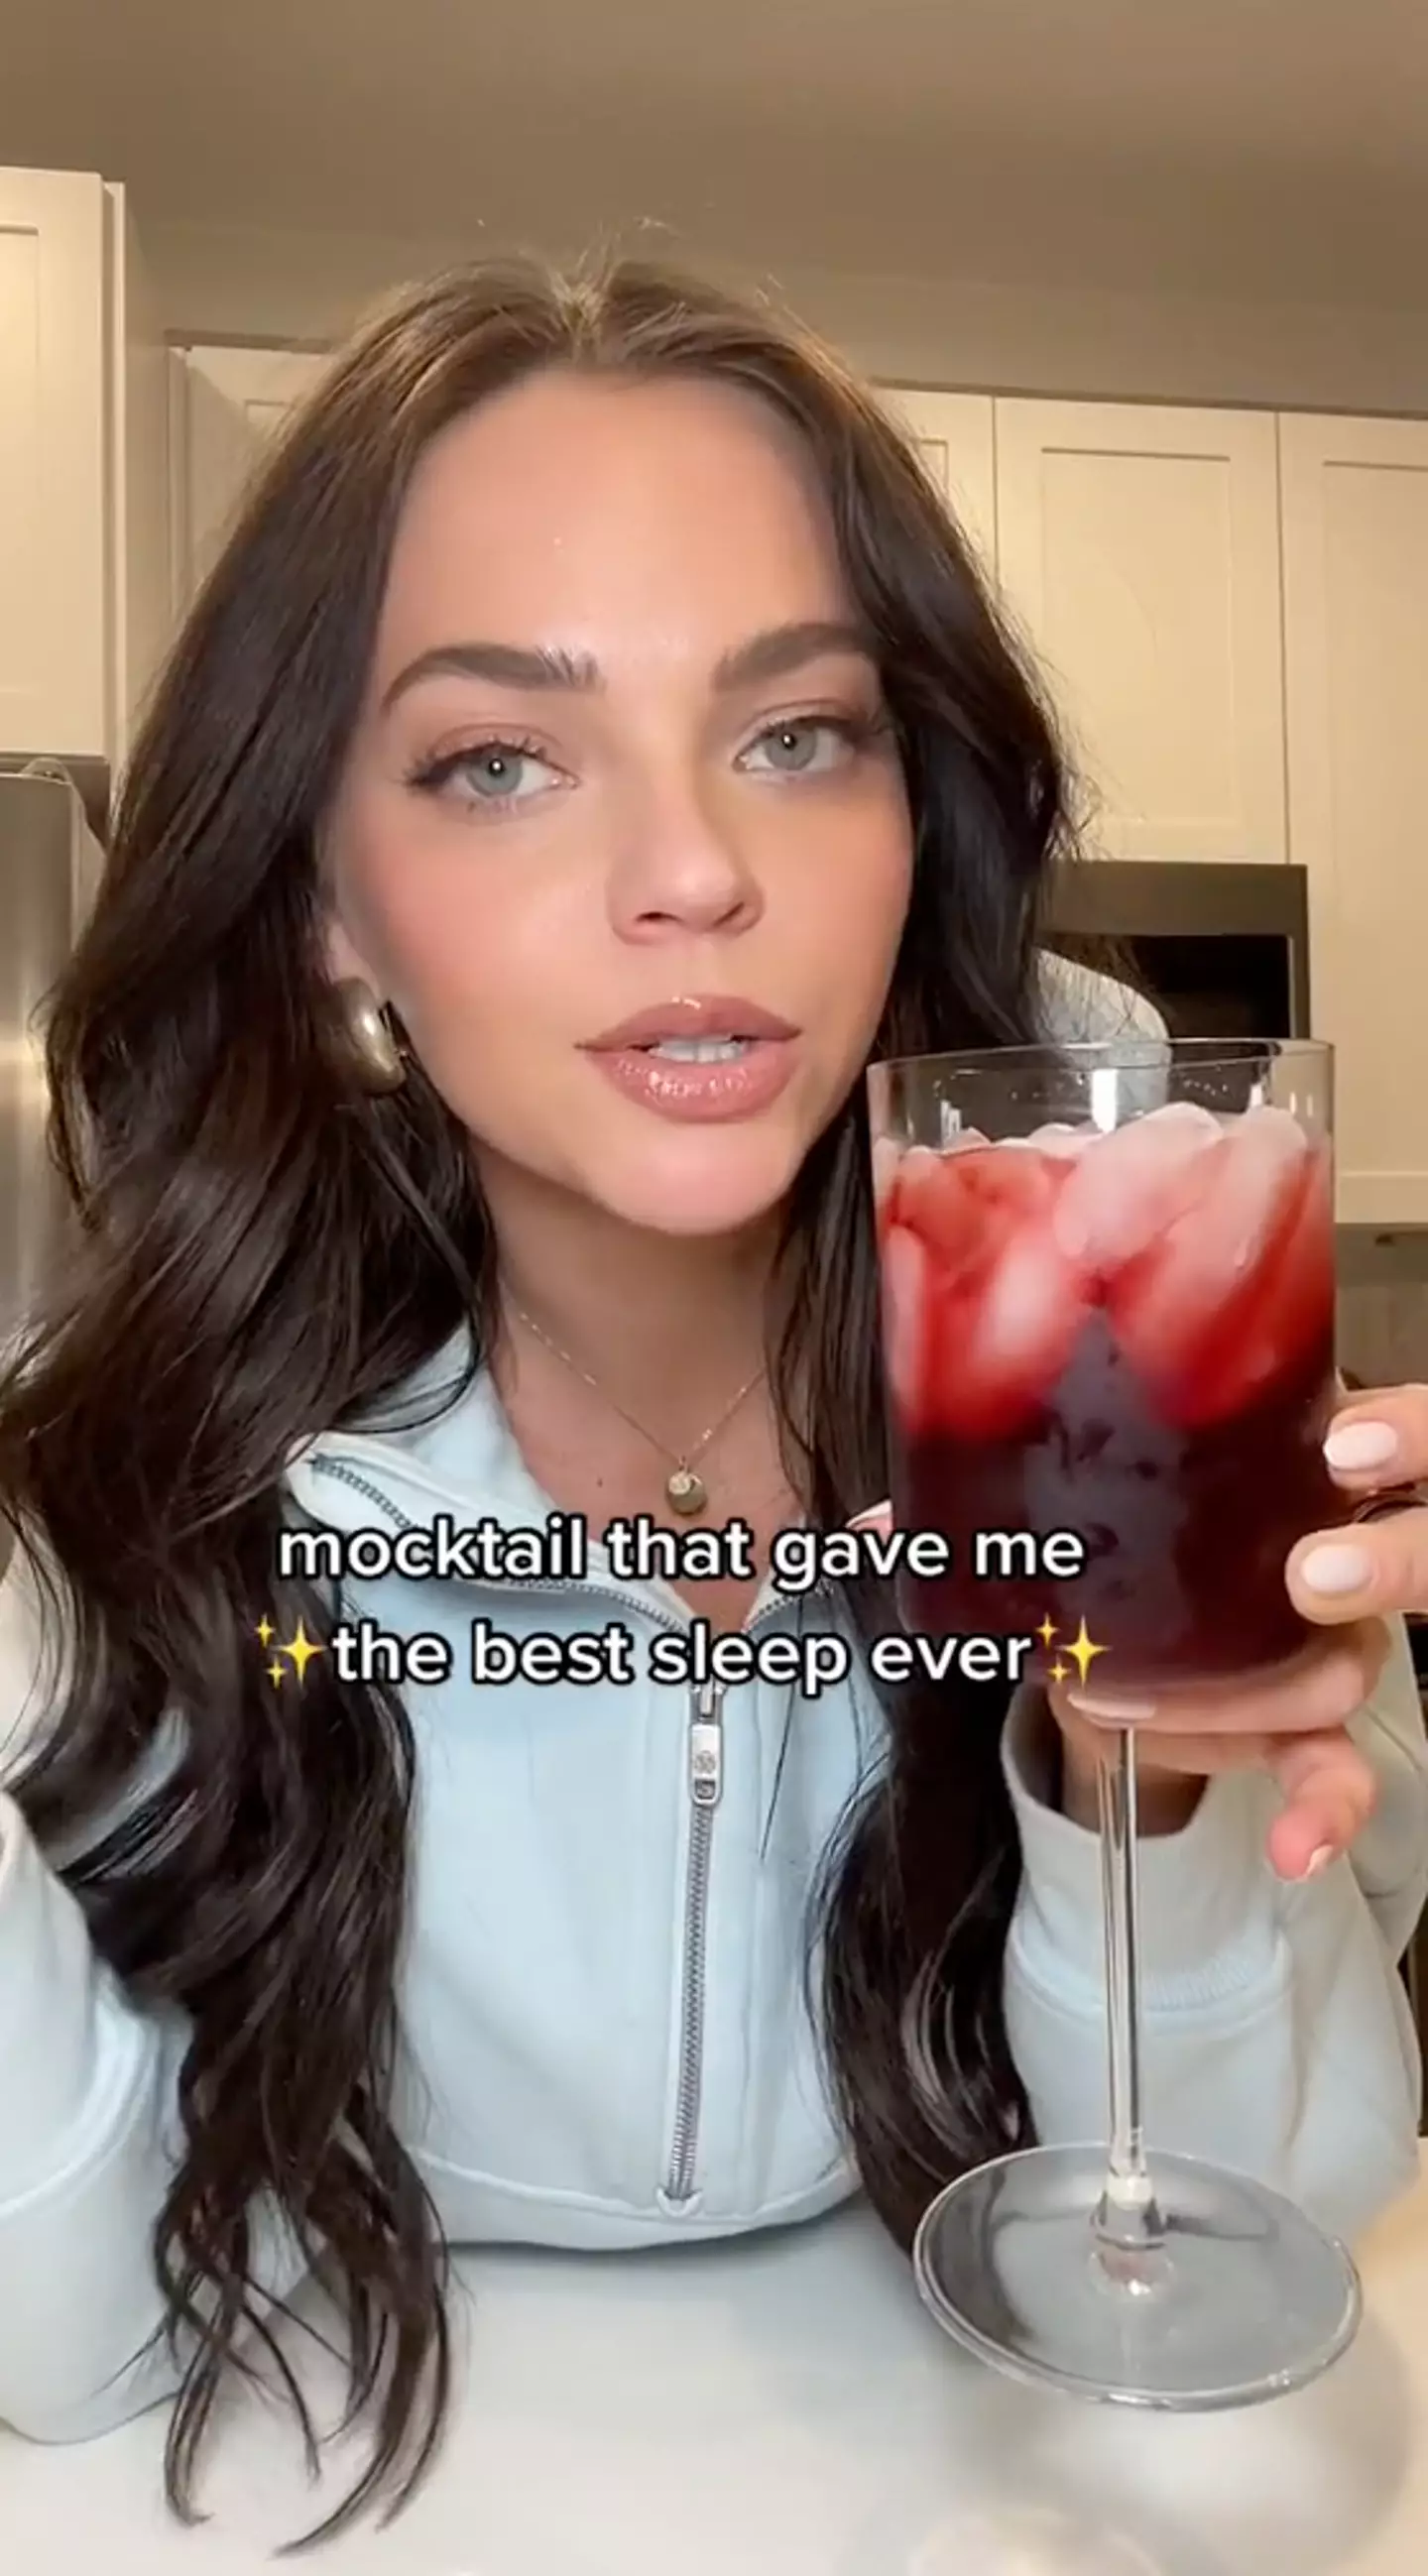 TikTokers are divided over the viral ‘sleepy girl mocktail' that supposedly gives people the ‘best night’s sleep ever’.